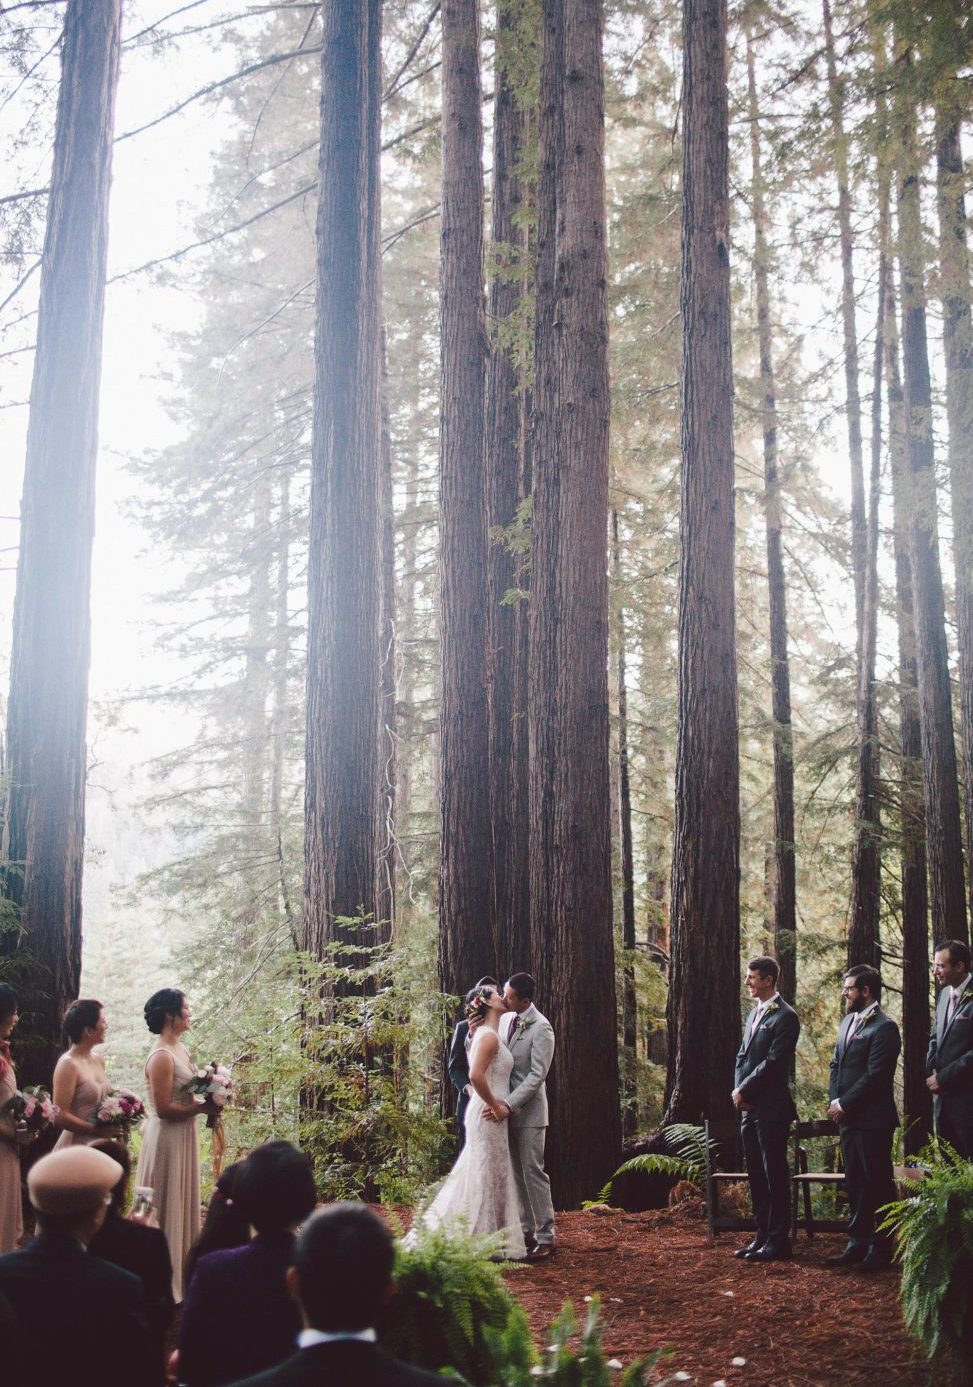 This camp style wedding took place in the redwoods in California, it featured some camp and rustic features to make everyone feel at ease